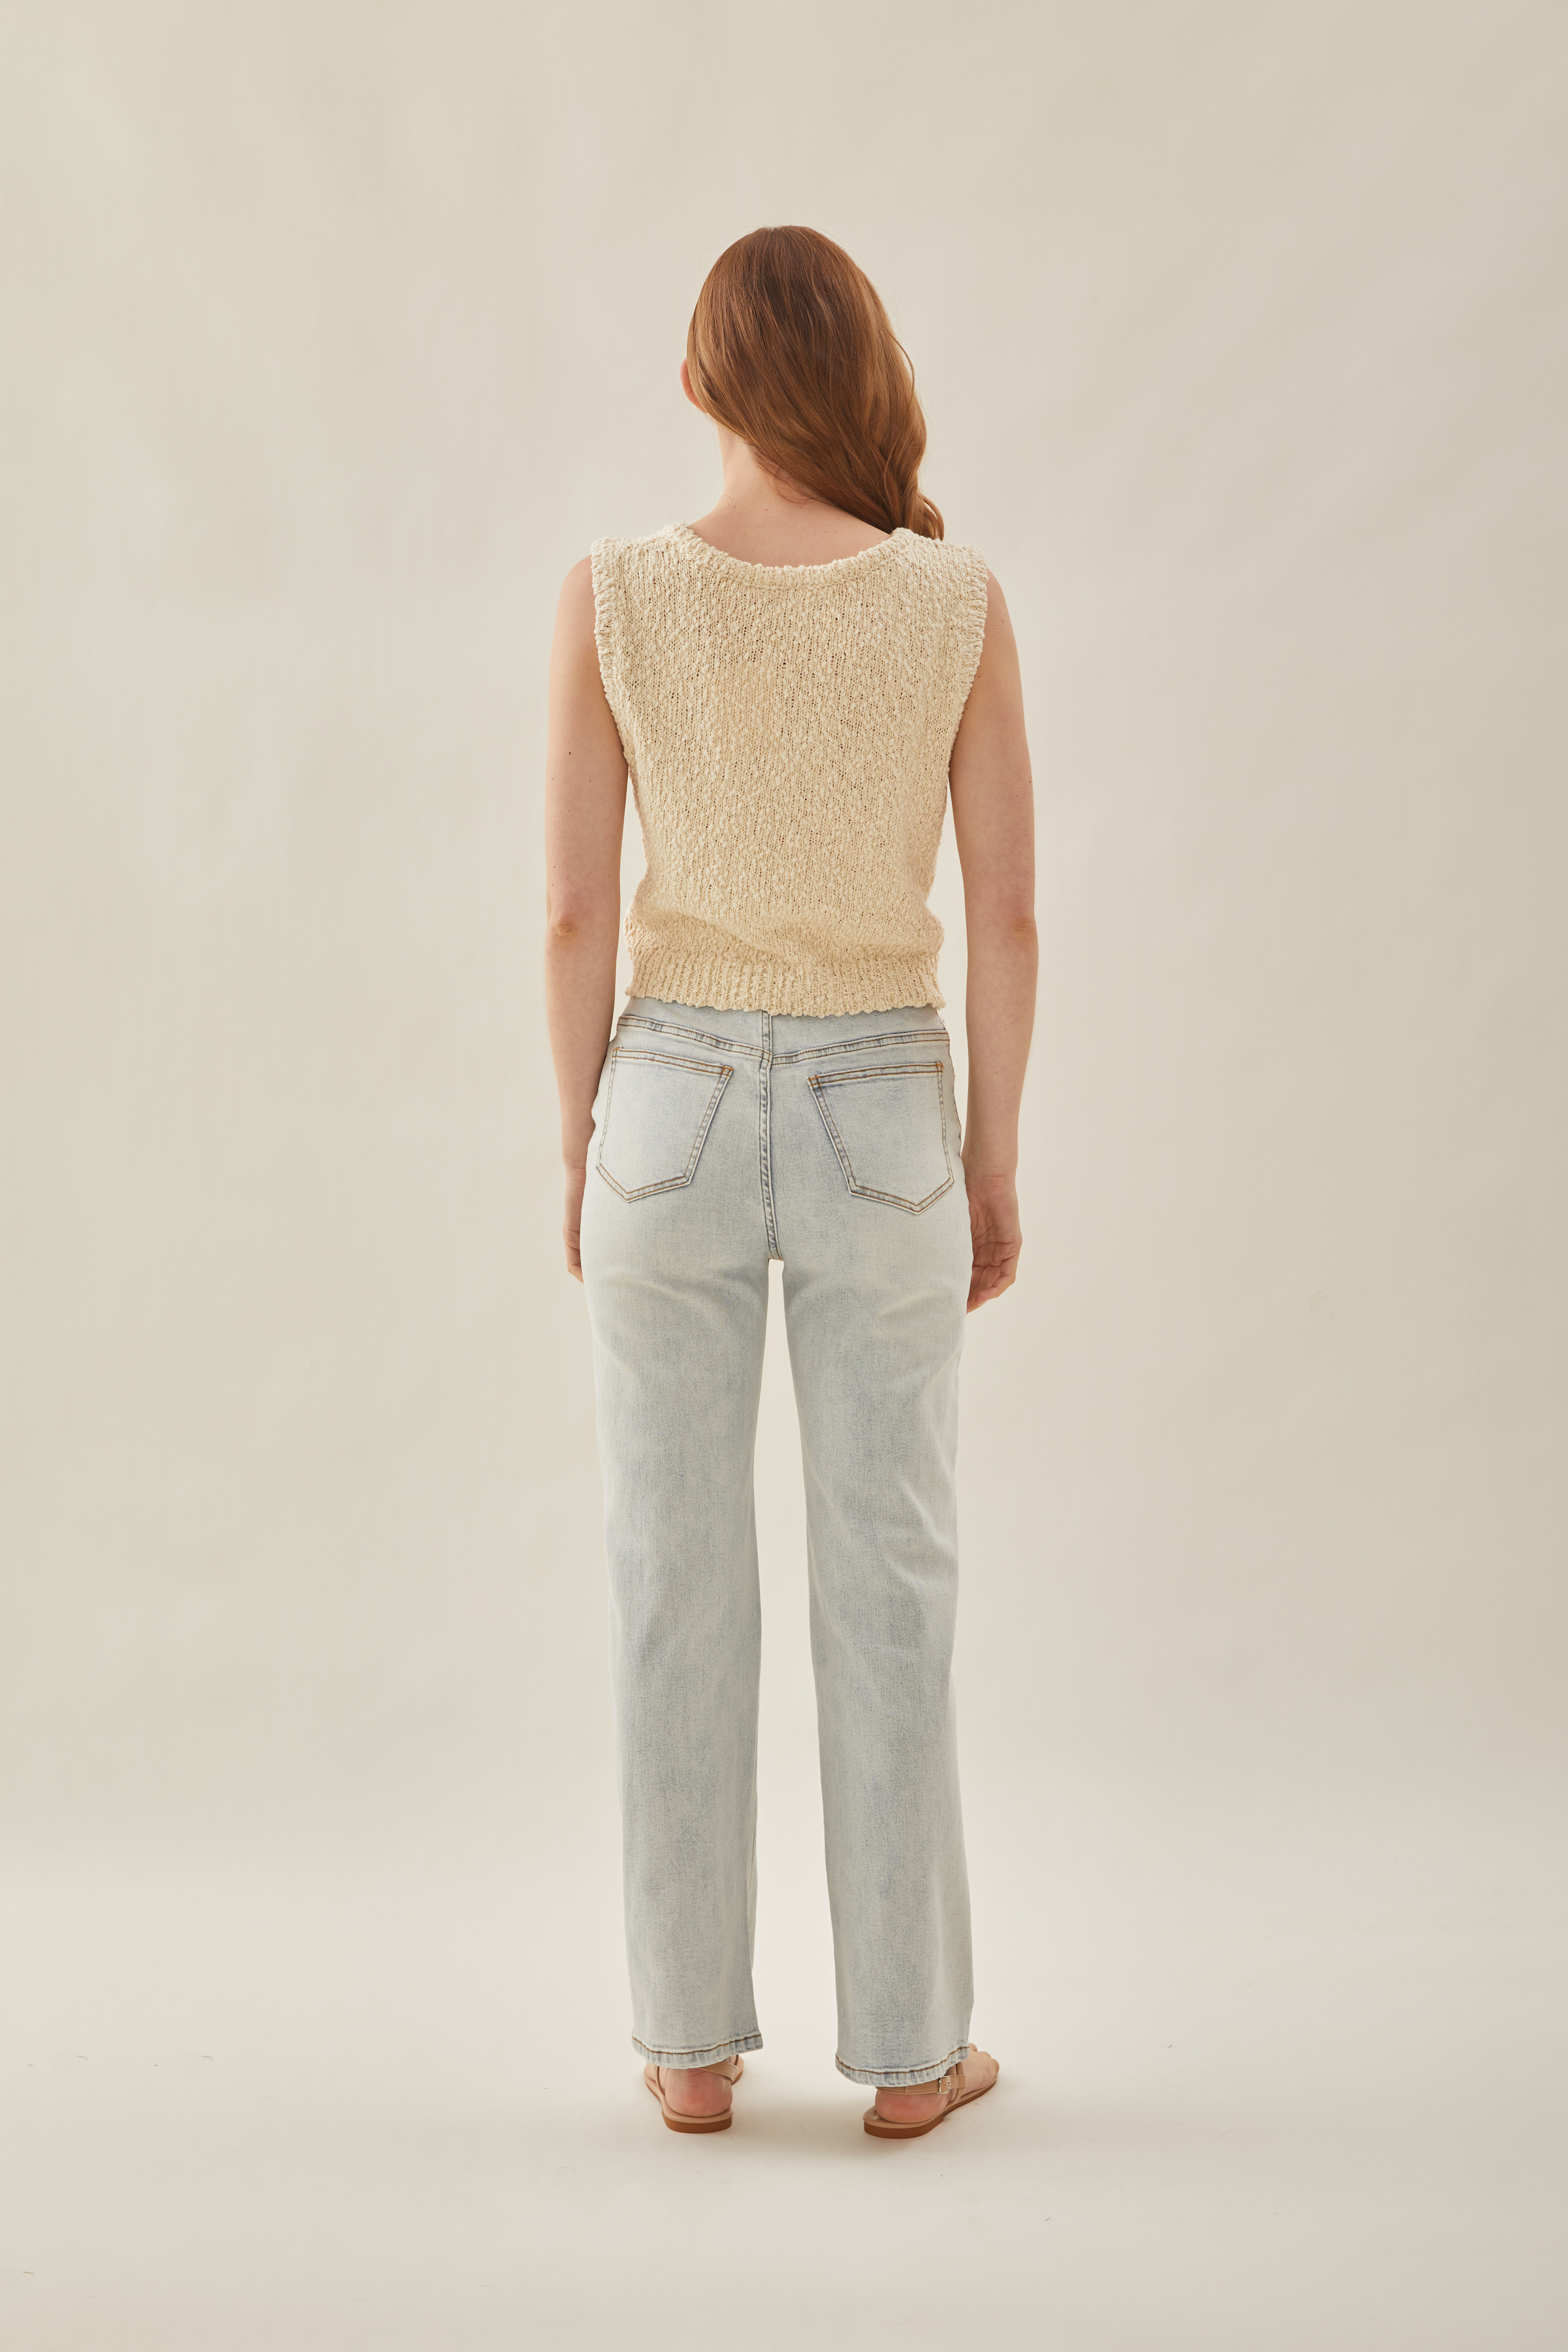 Textured Knit Vest in Natural